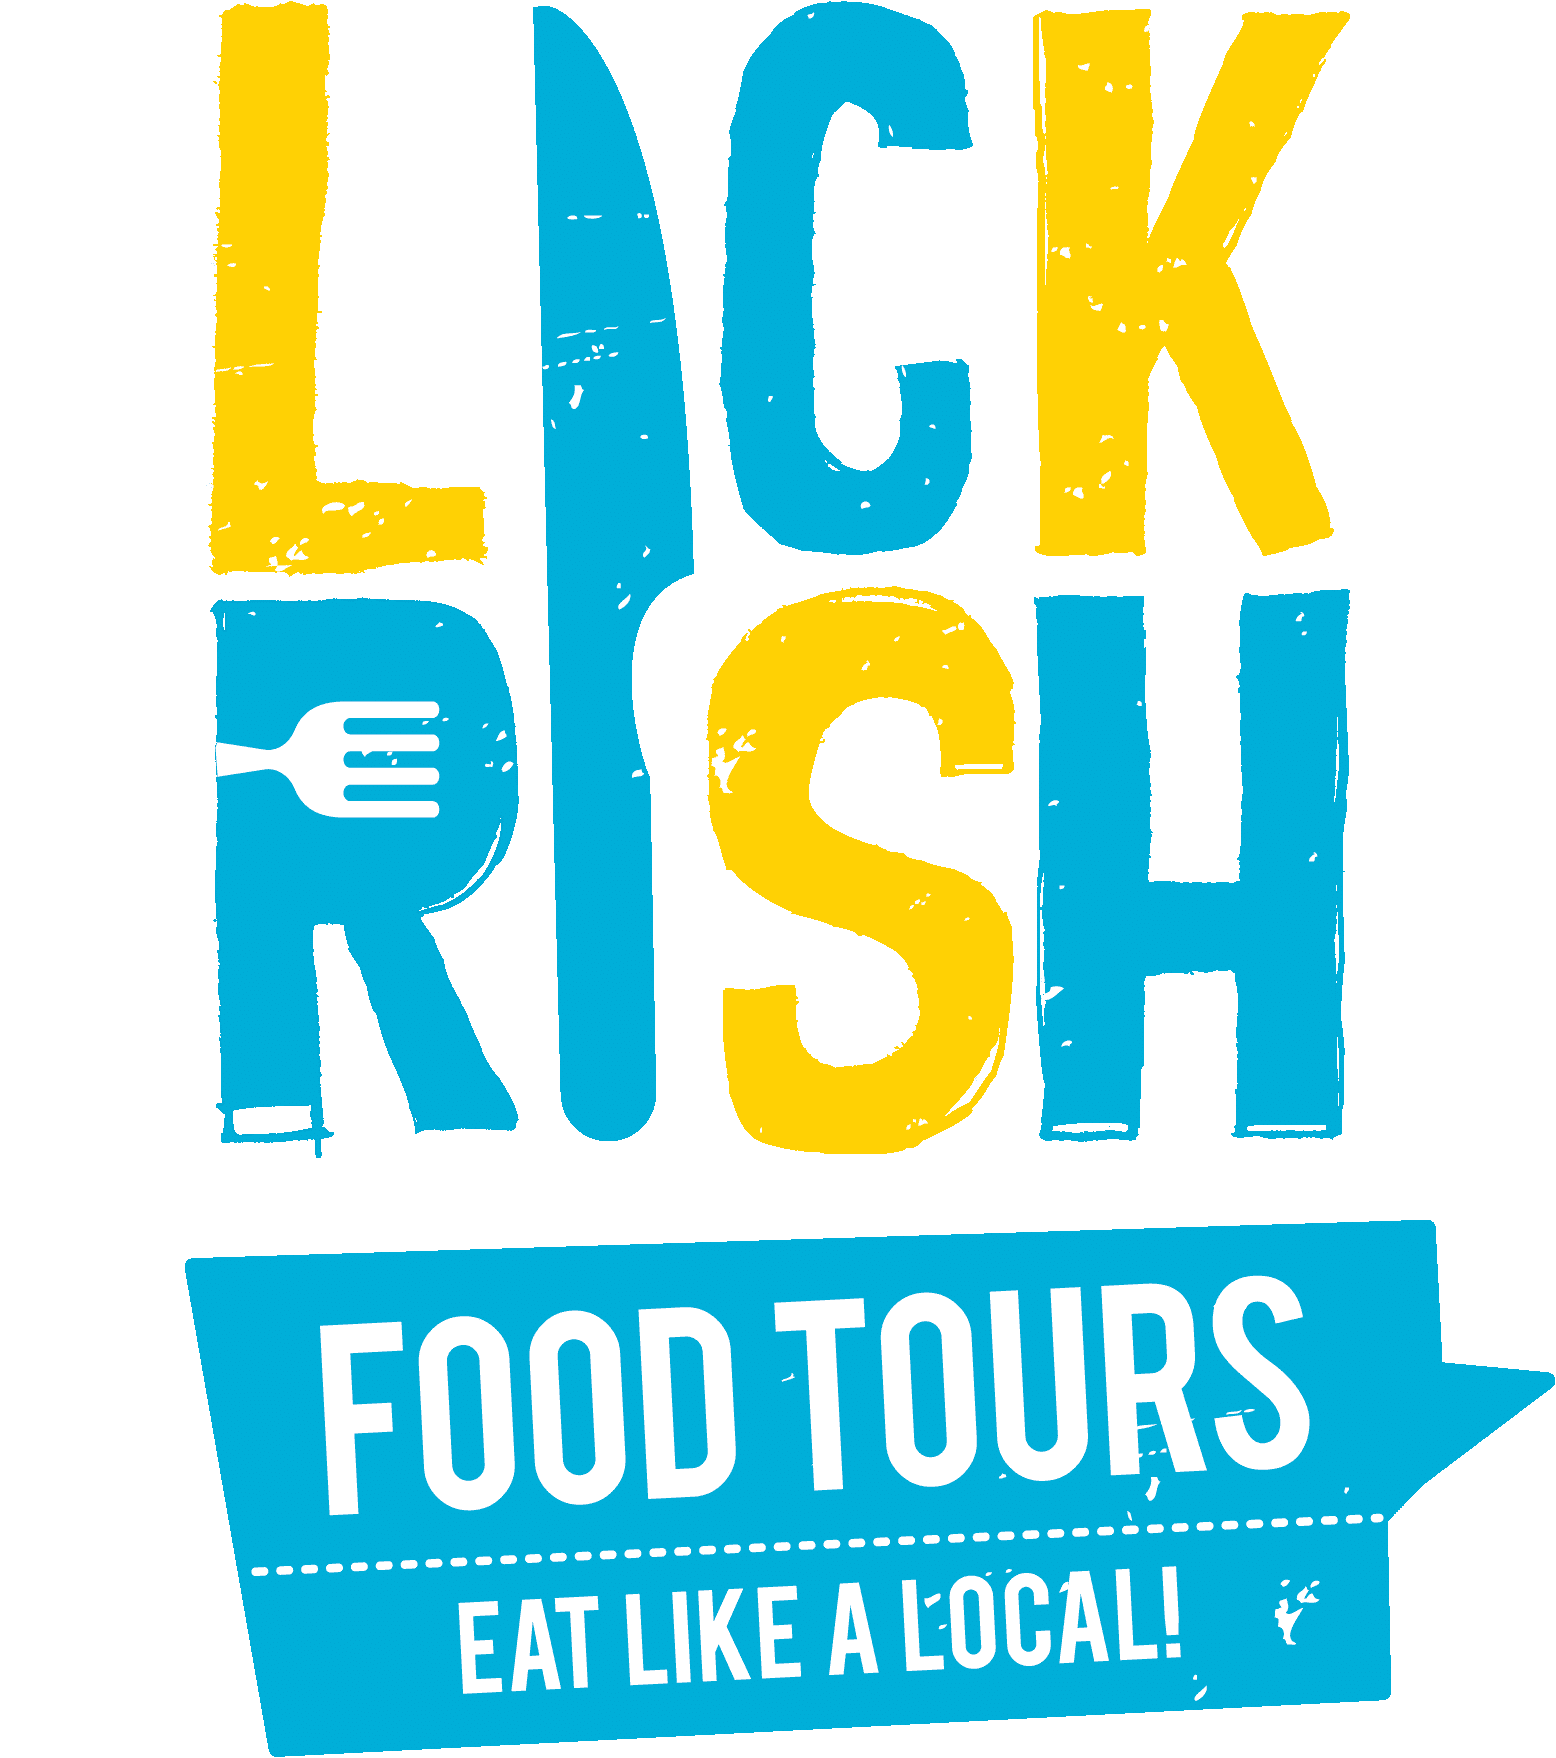 Featured on Lickrish Food Tours